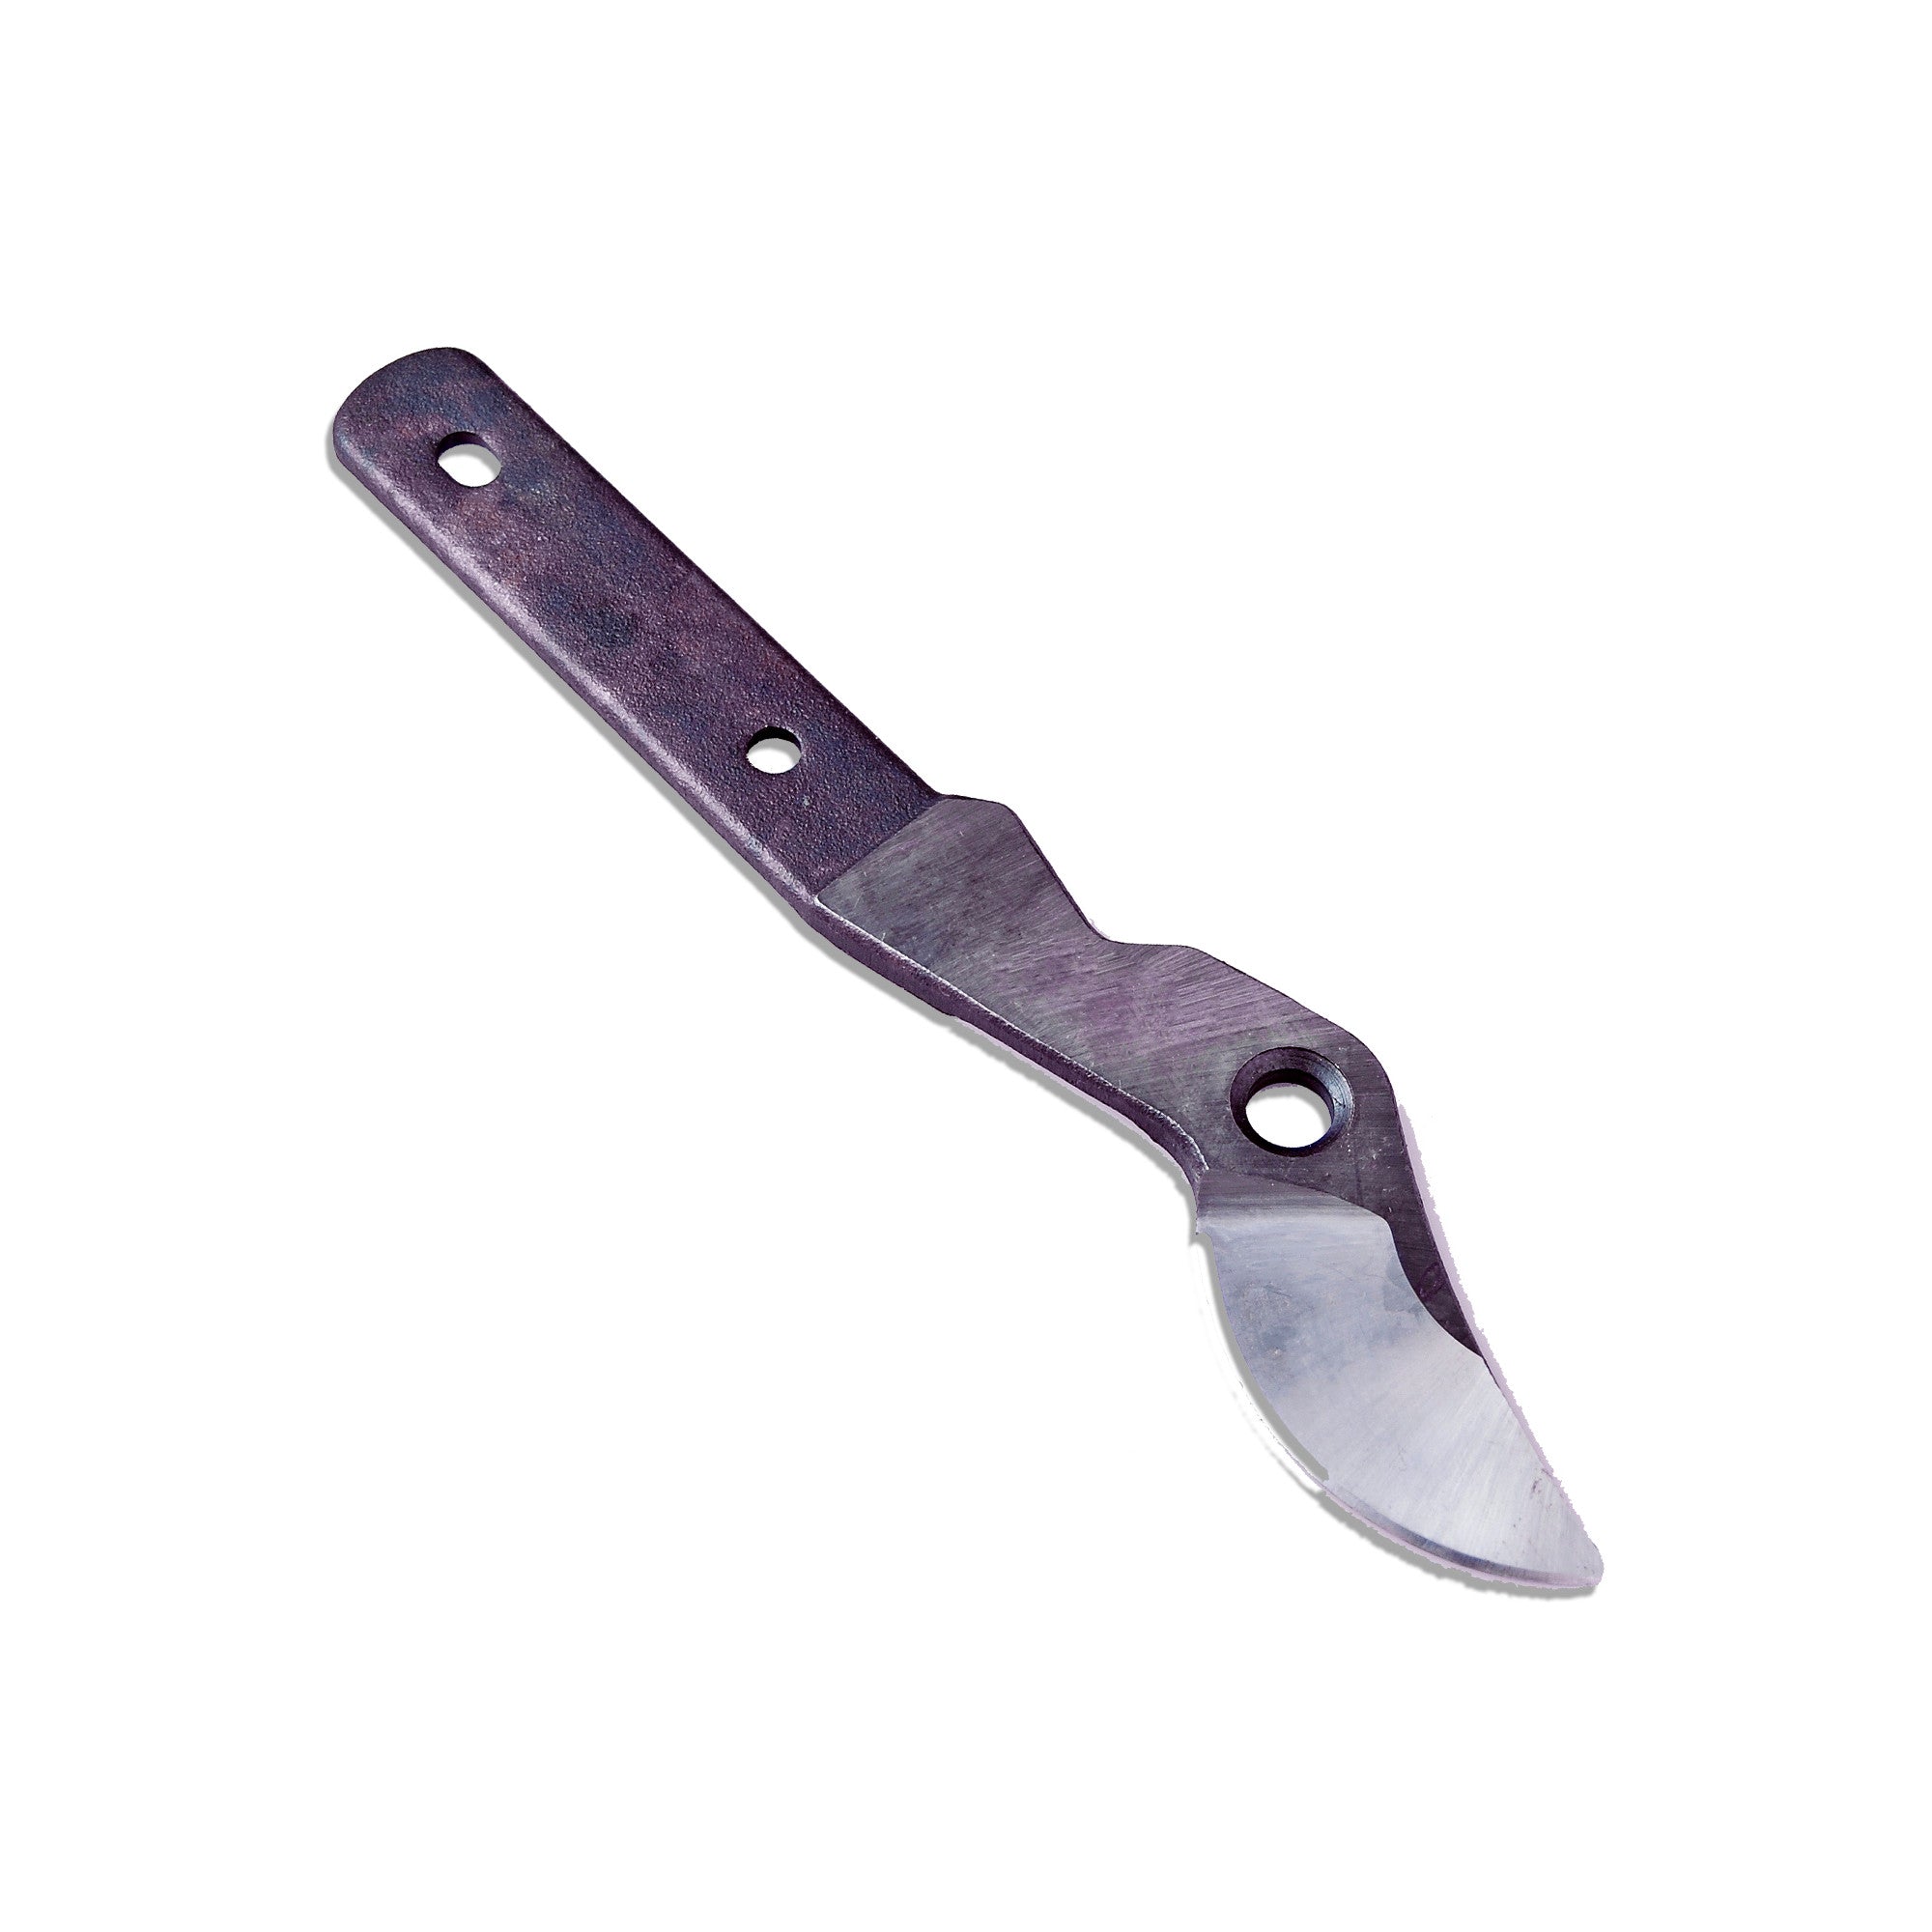 Replacement Blade for Bypass Lopper